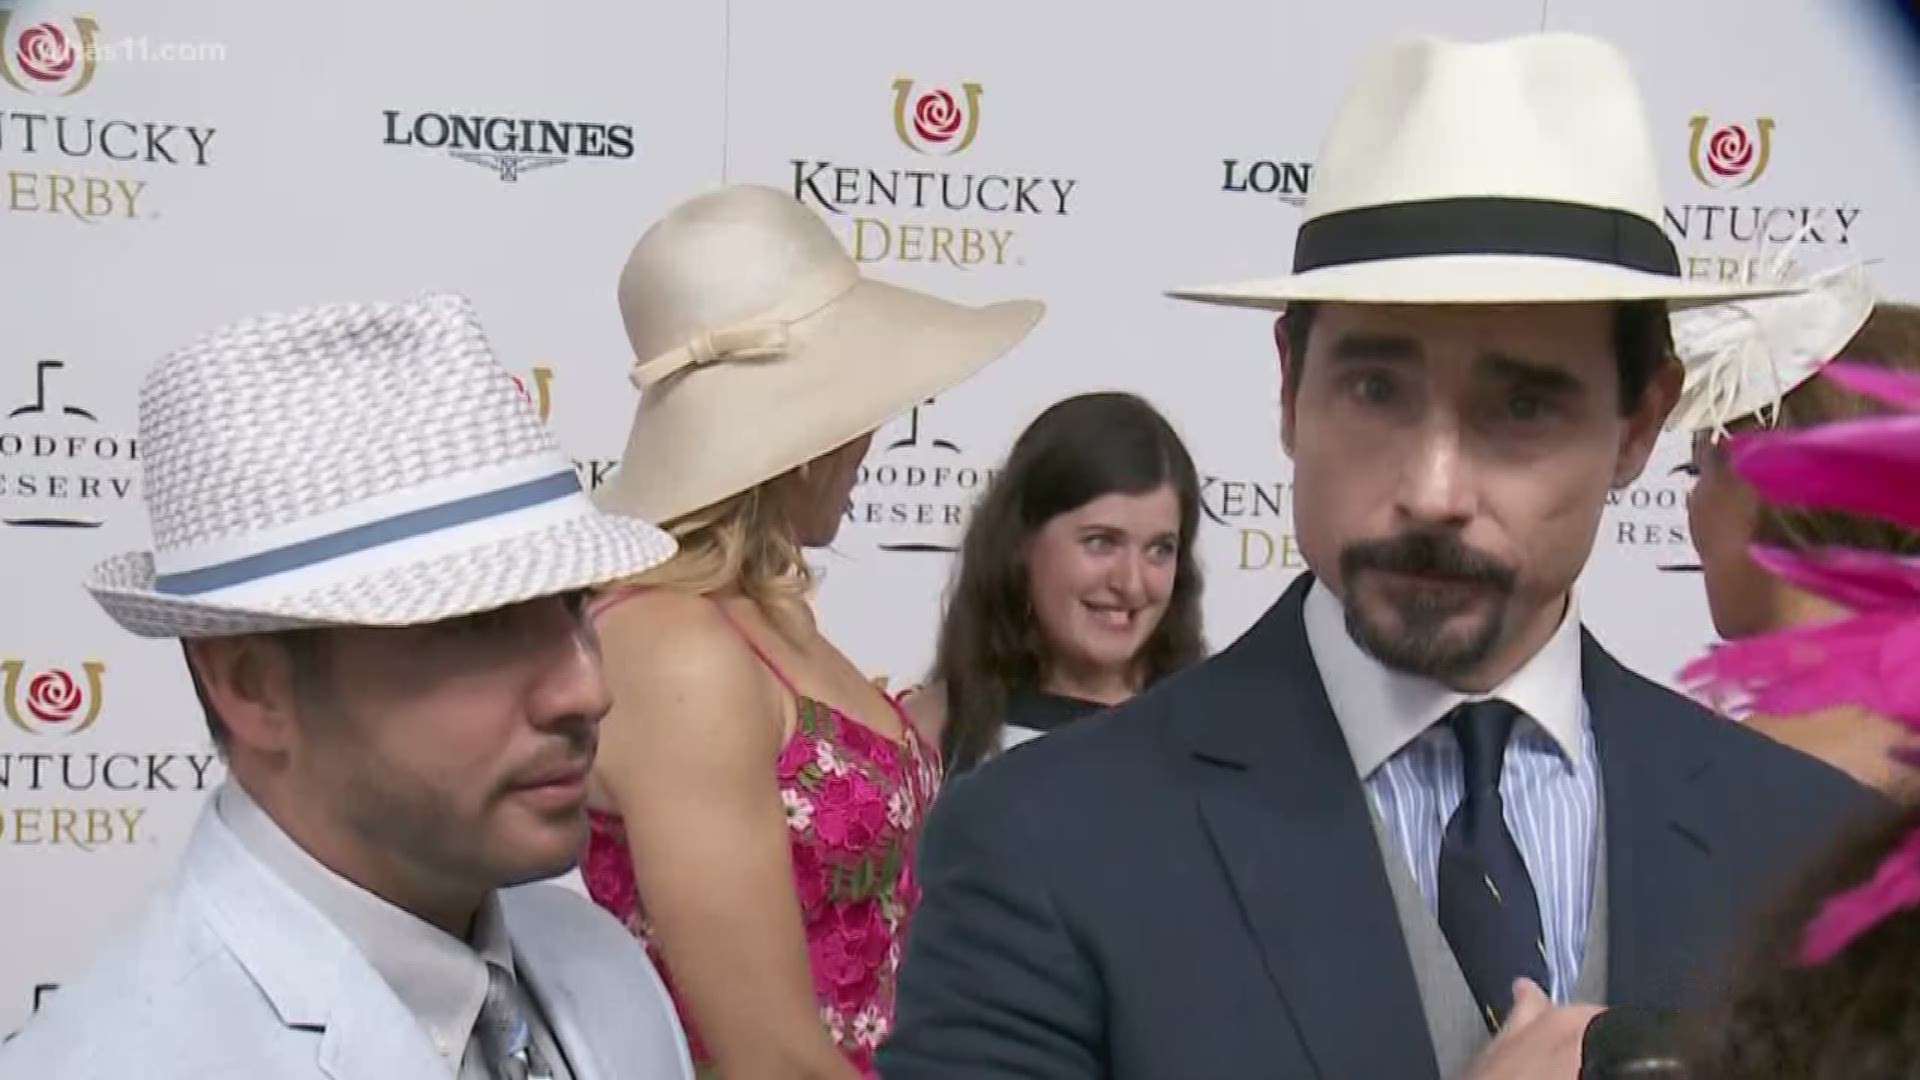 From a home-grown Backstreet Boy to a That '70s Show star, celebrities gave their favorite Kentucky Derby advice.